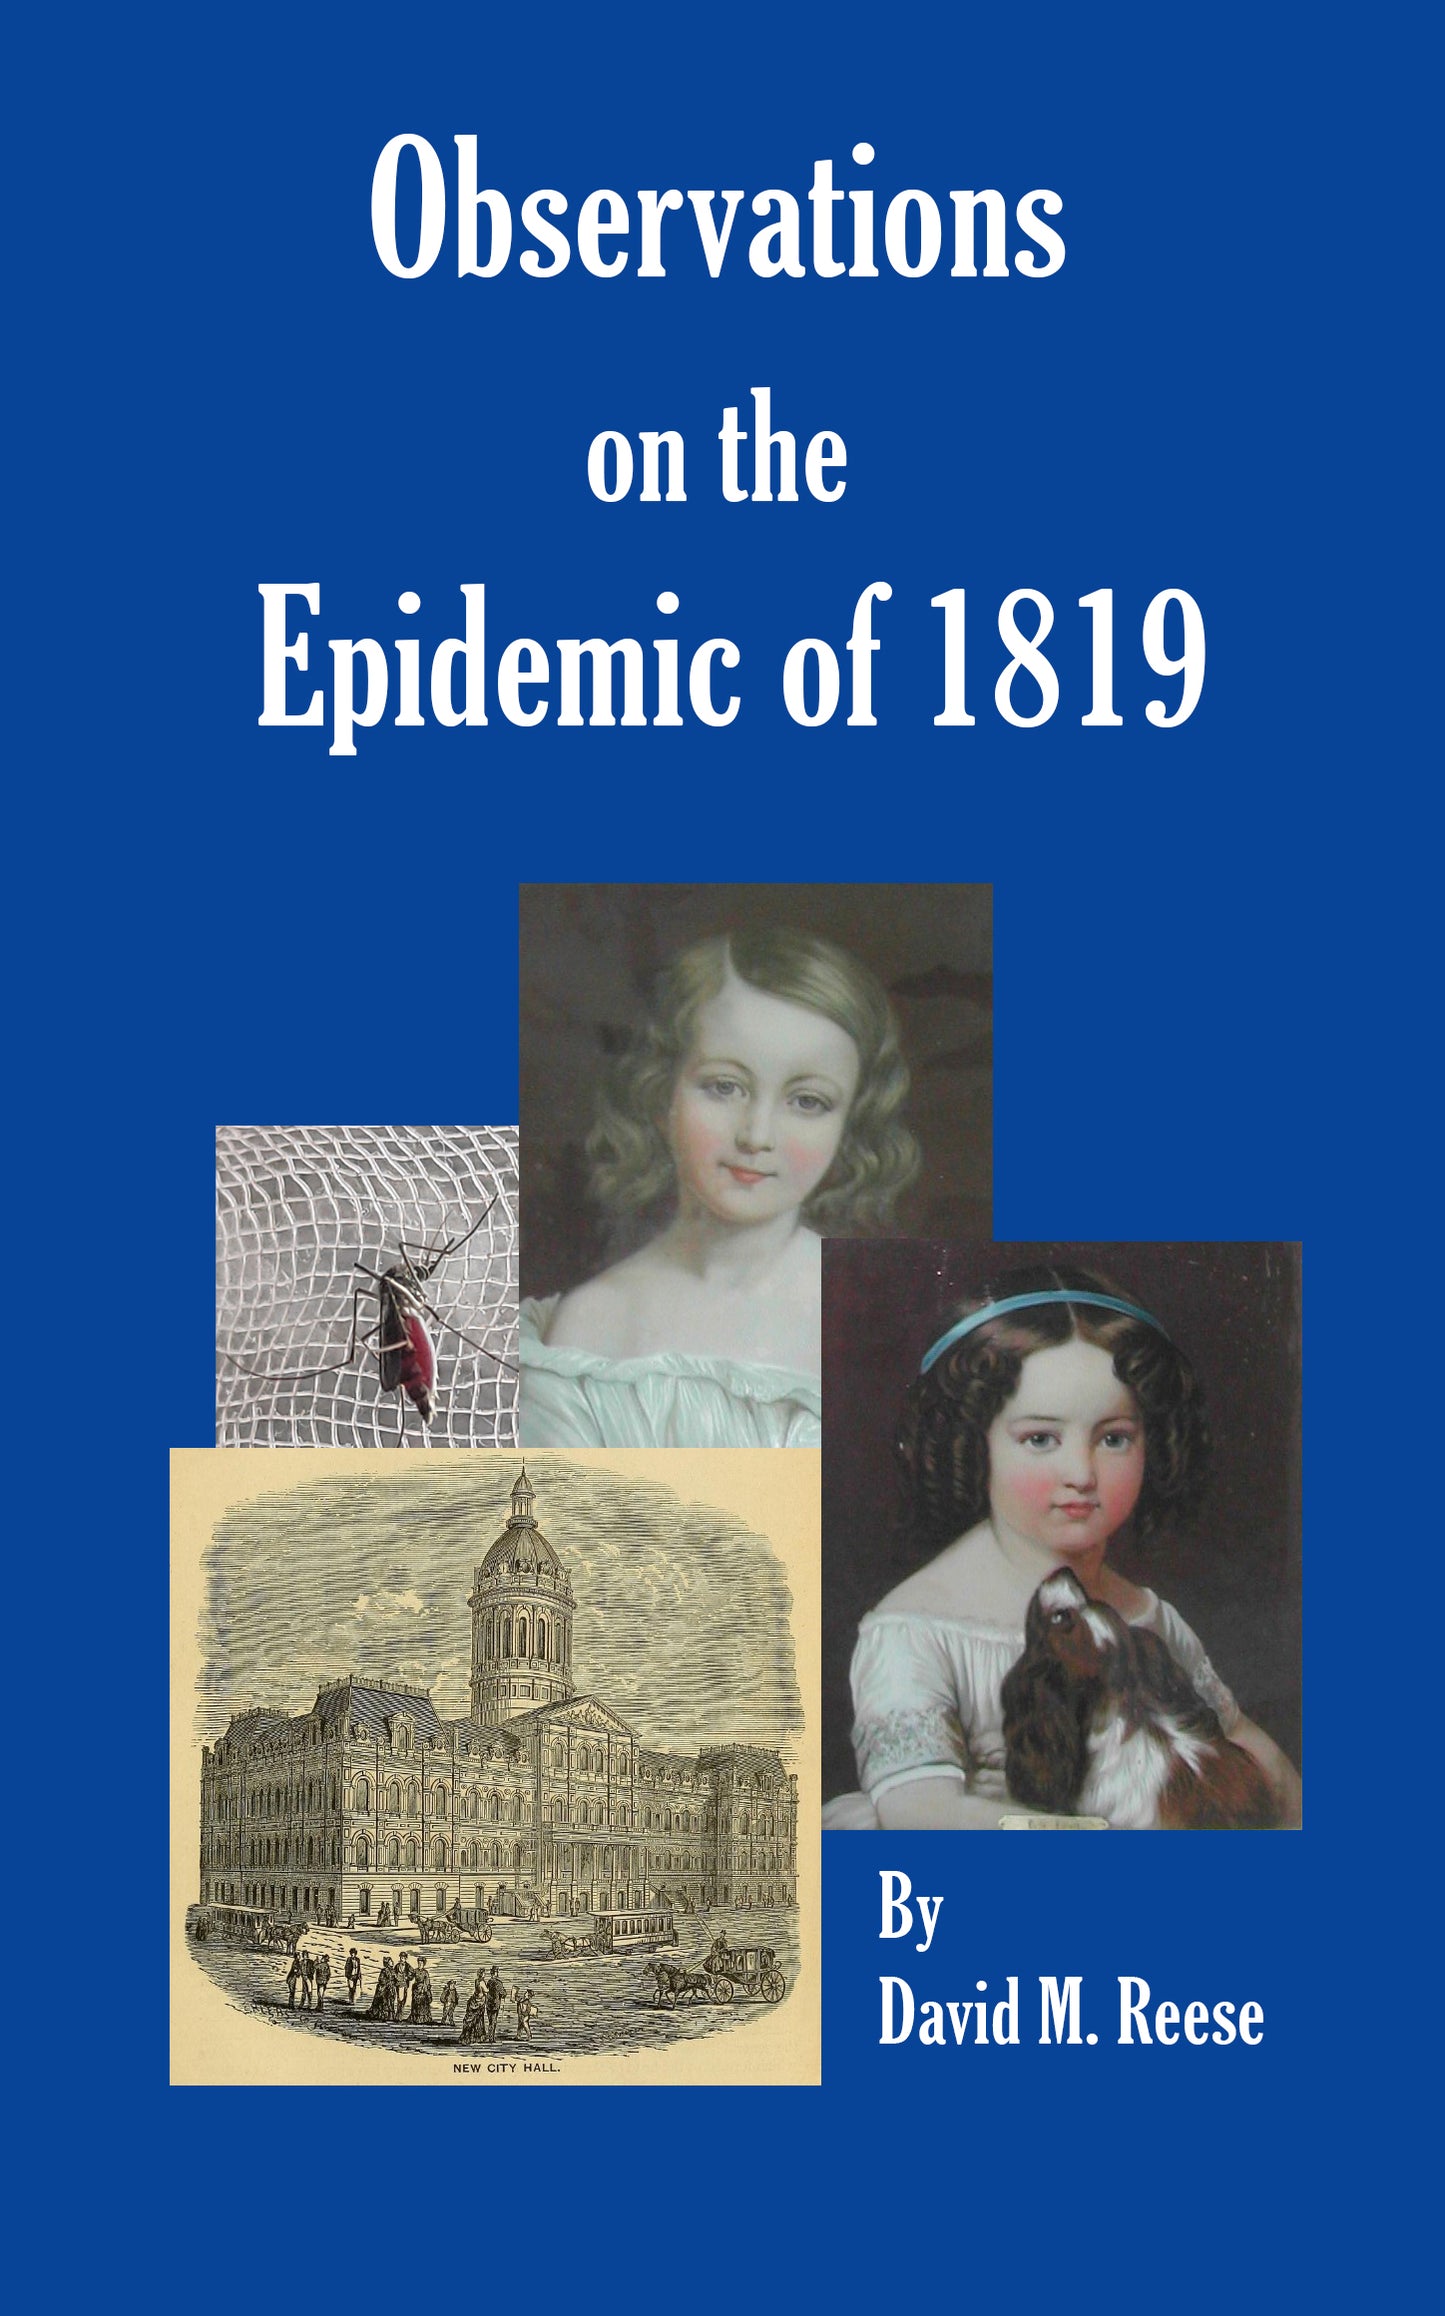 Observatons of the Epidemic of 1819